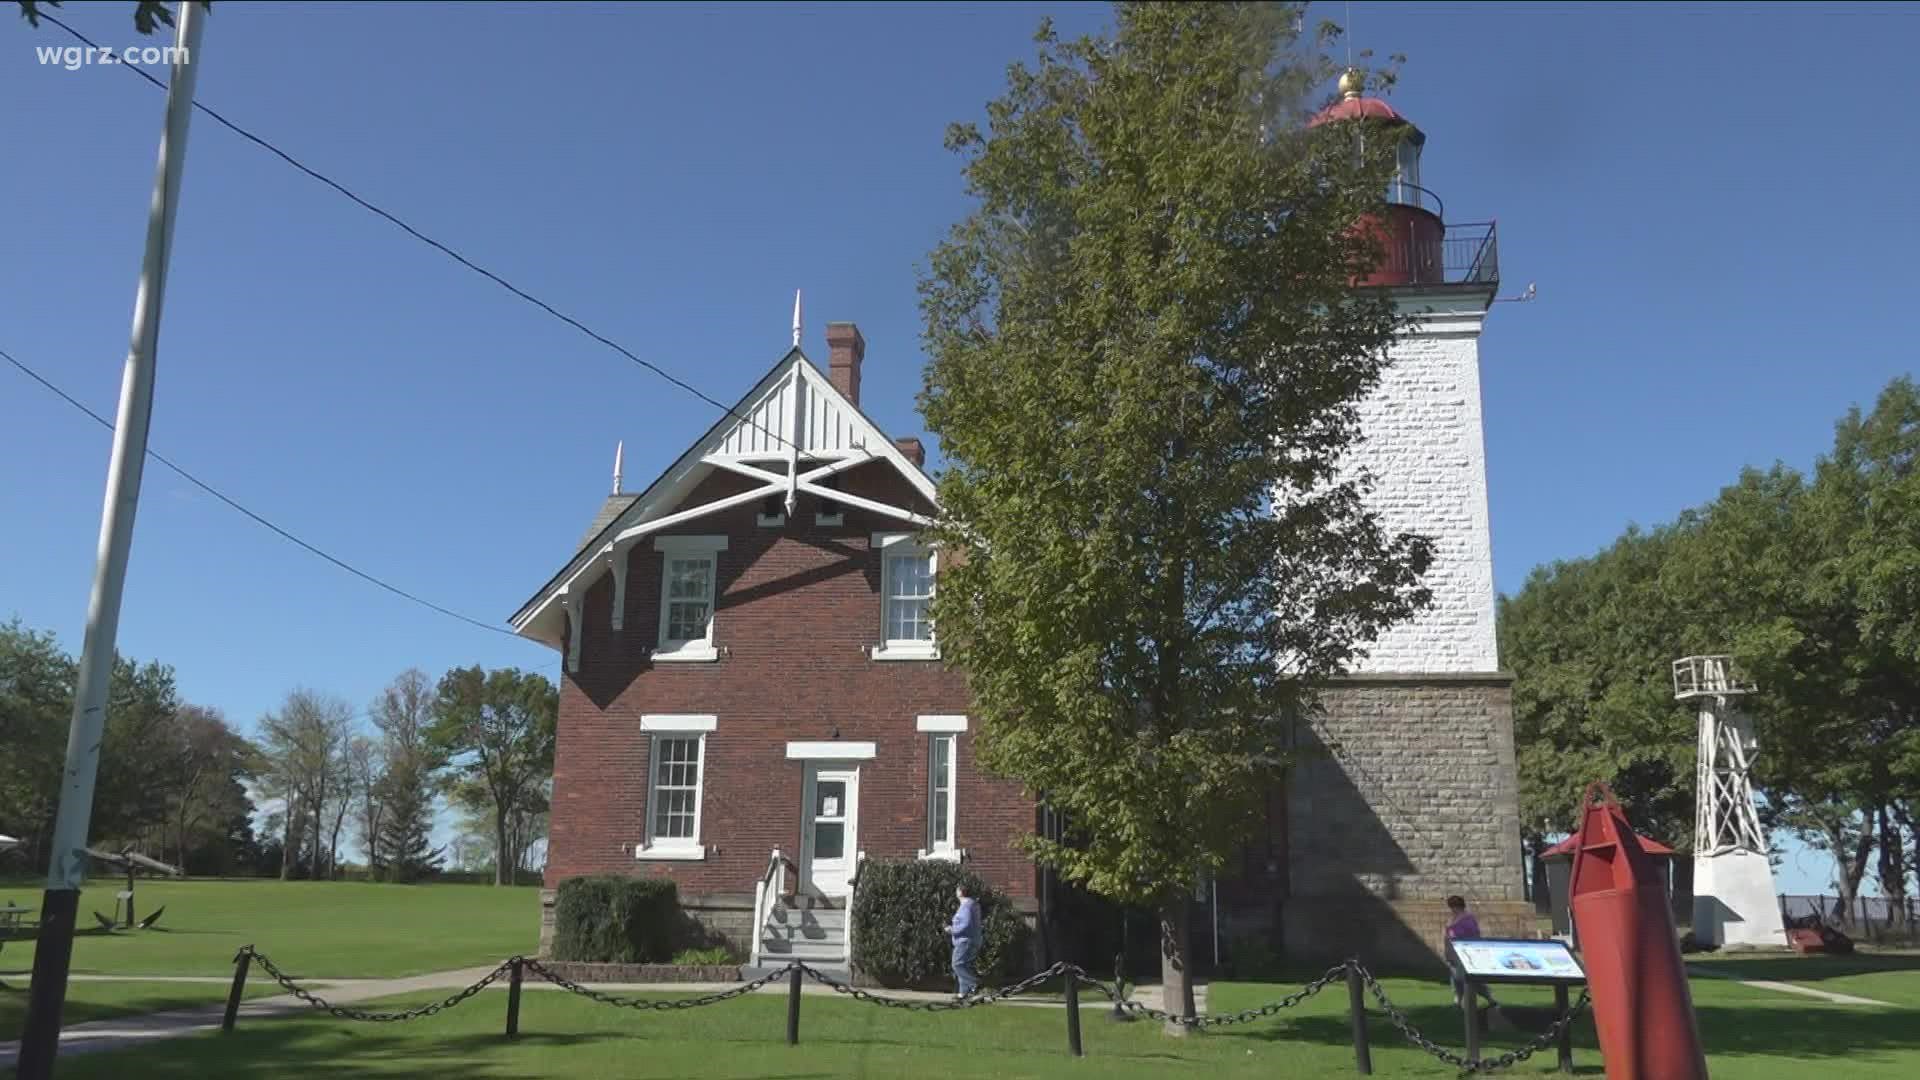 A visit to the historic Dunkirk lighthouse will give you a bird's eye view of Lake Erie and take you on a trip back in time.